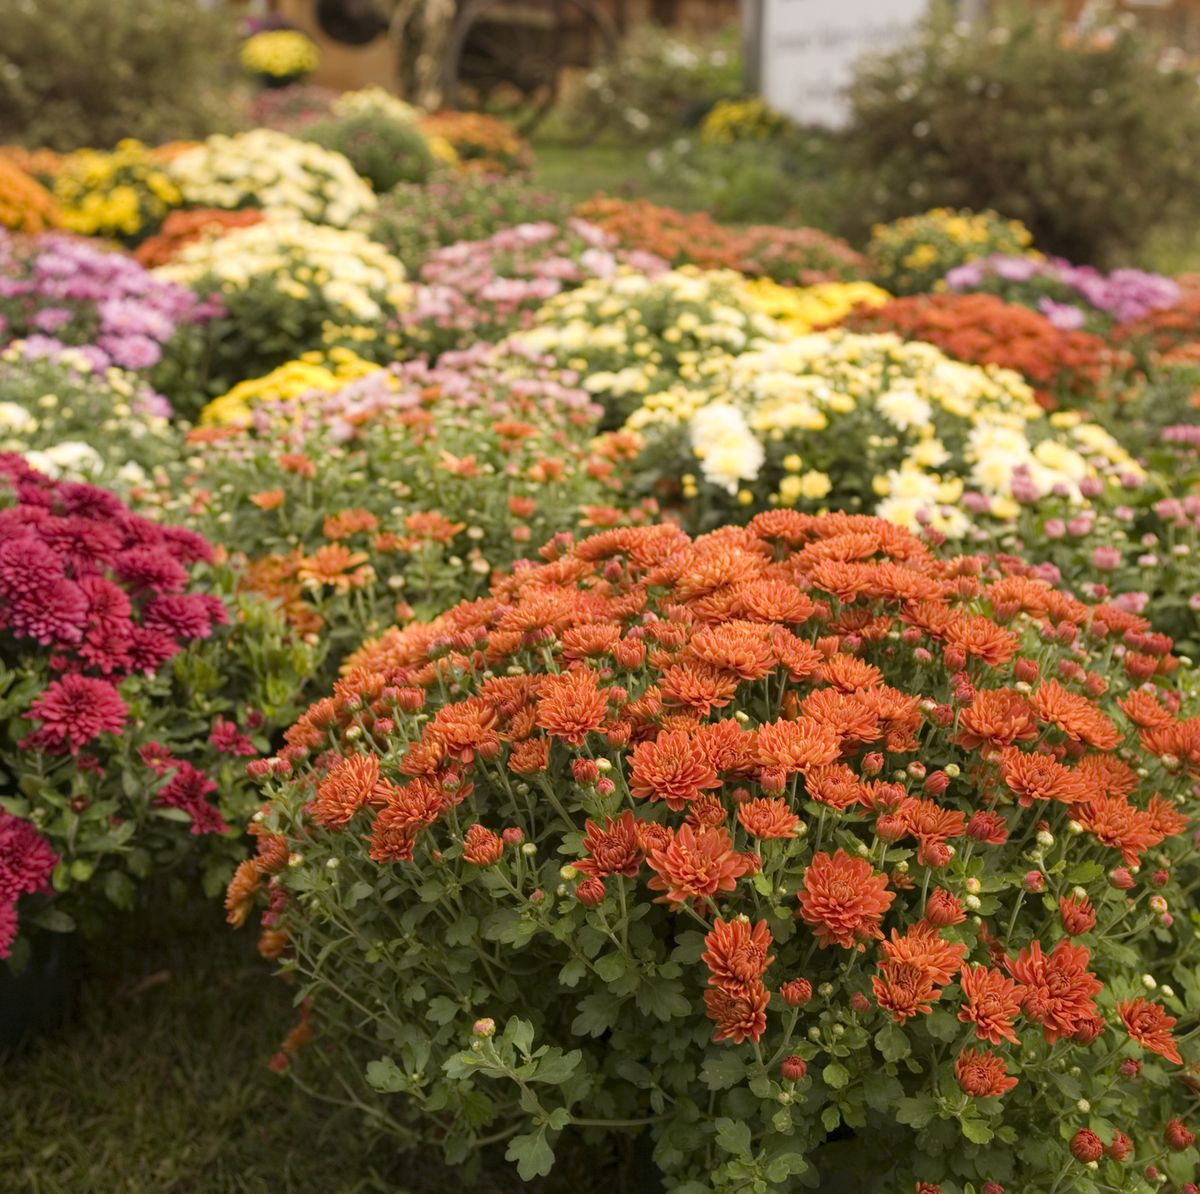 IV. Tips for Growing a Successful Fall Garden